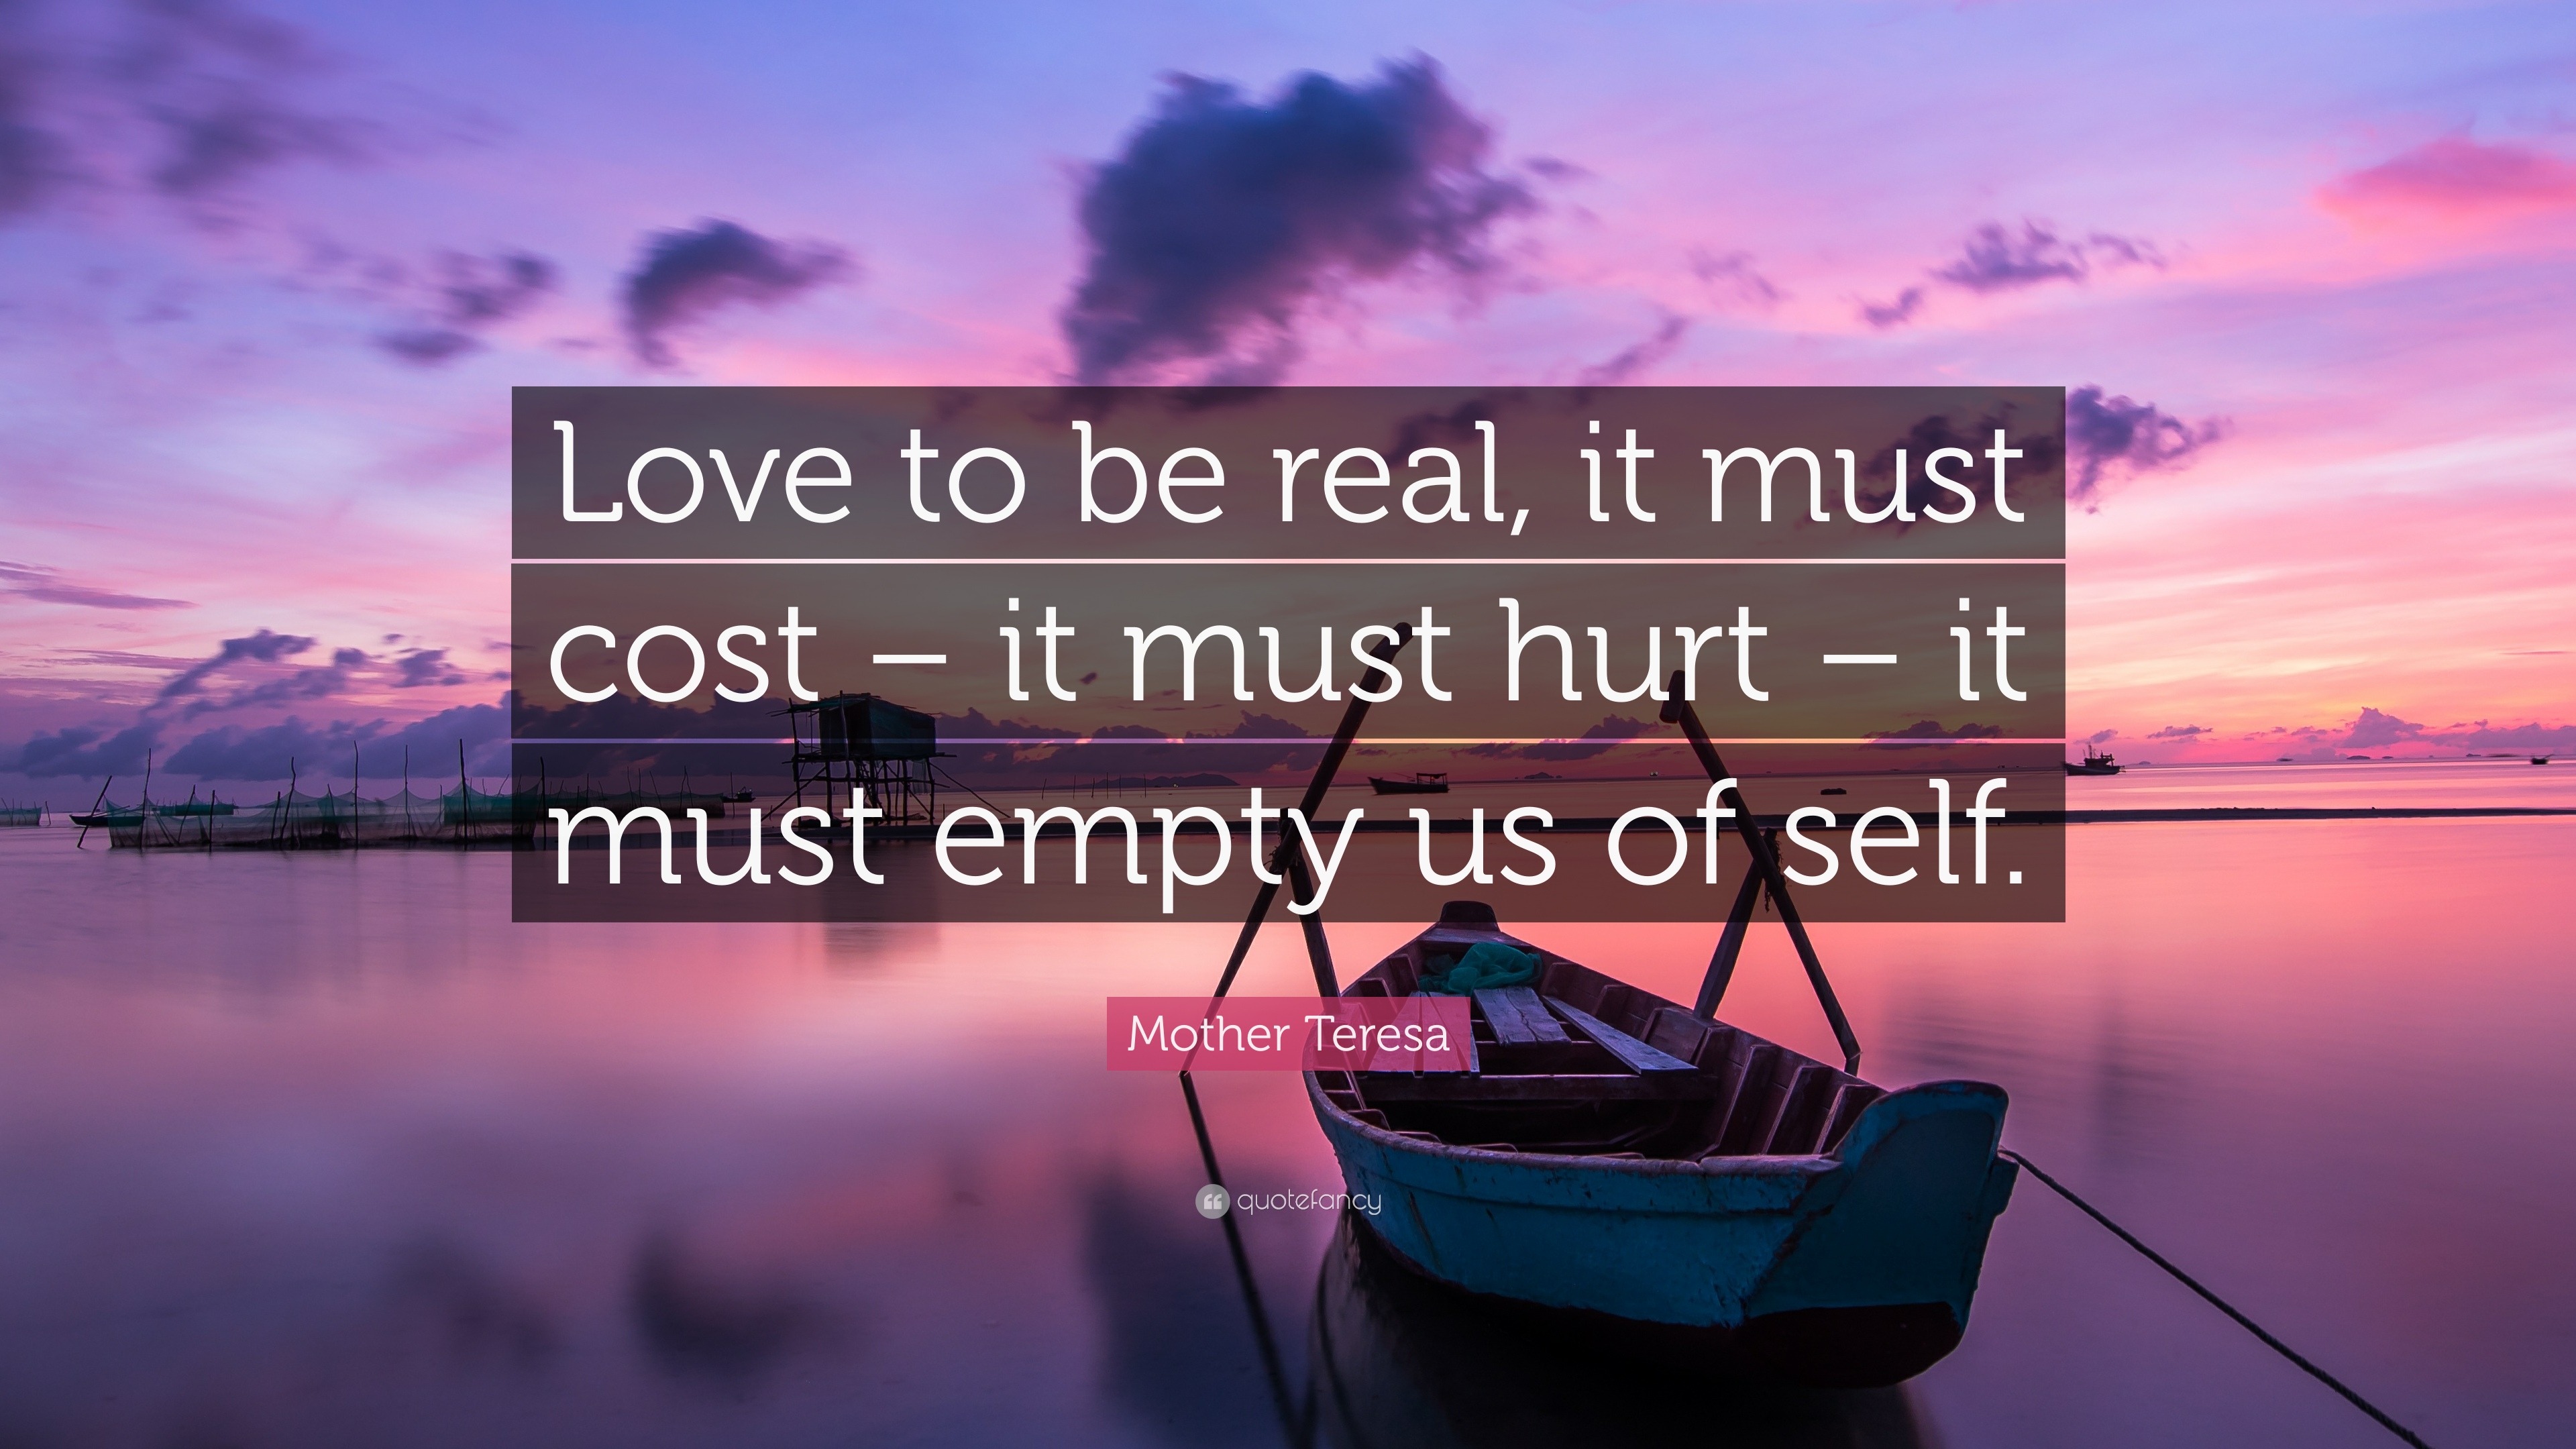 Mother Teresa Quote “Love to be real it must cost – it must